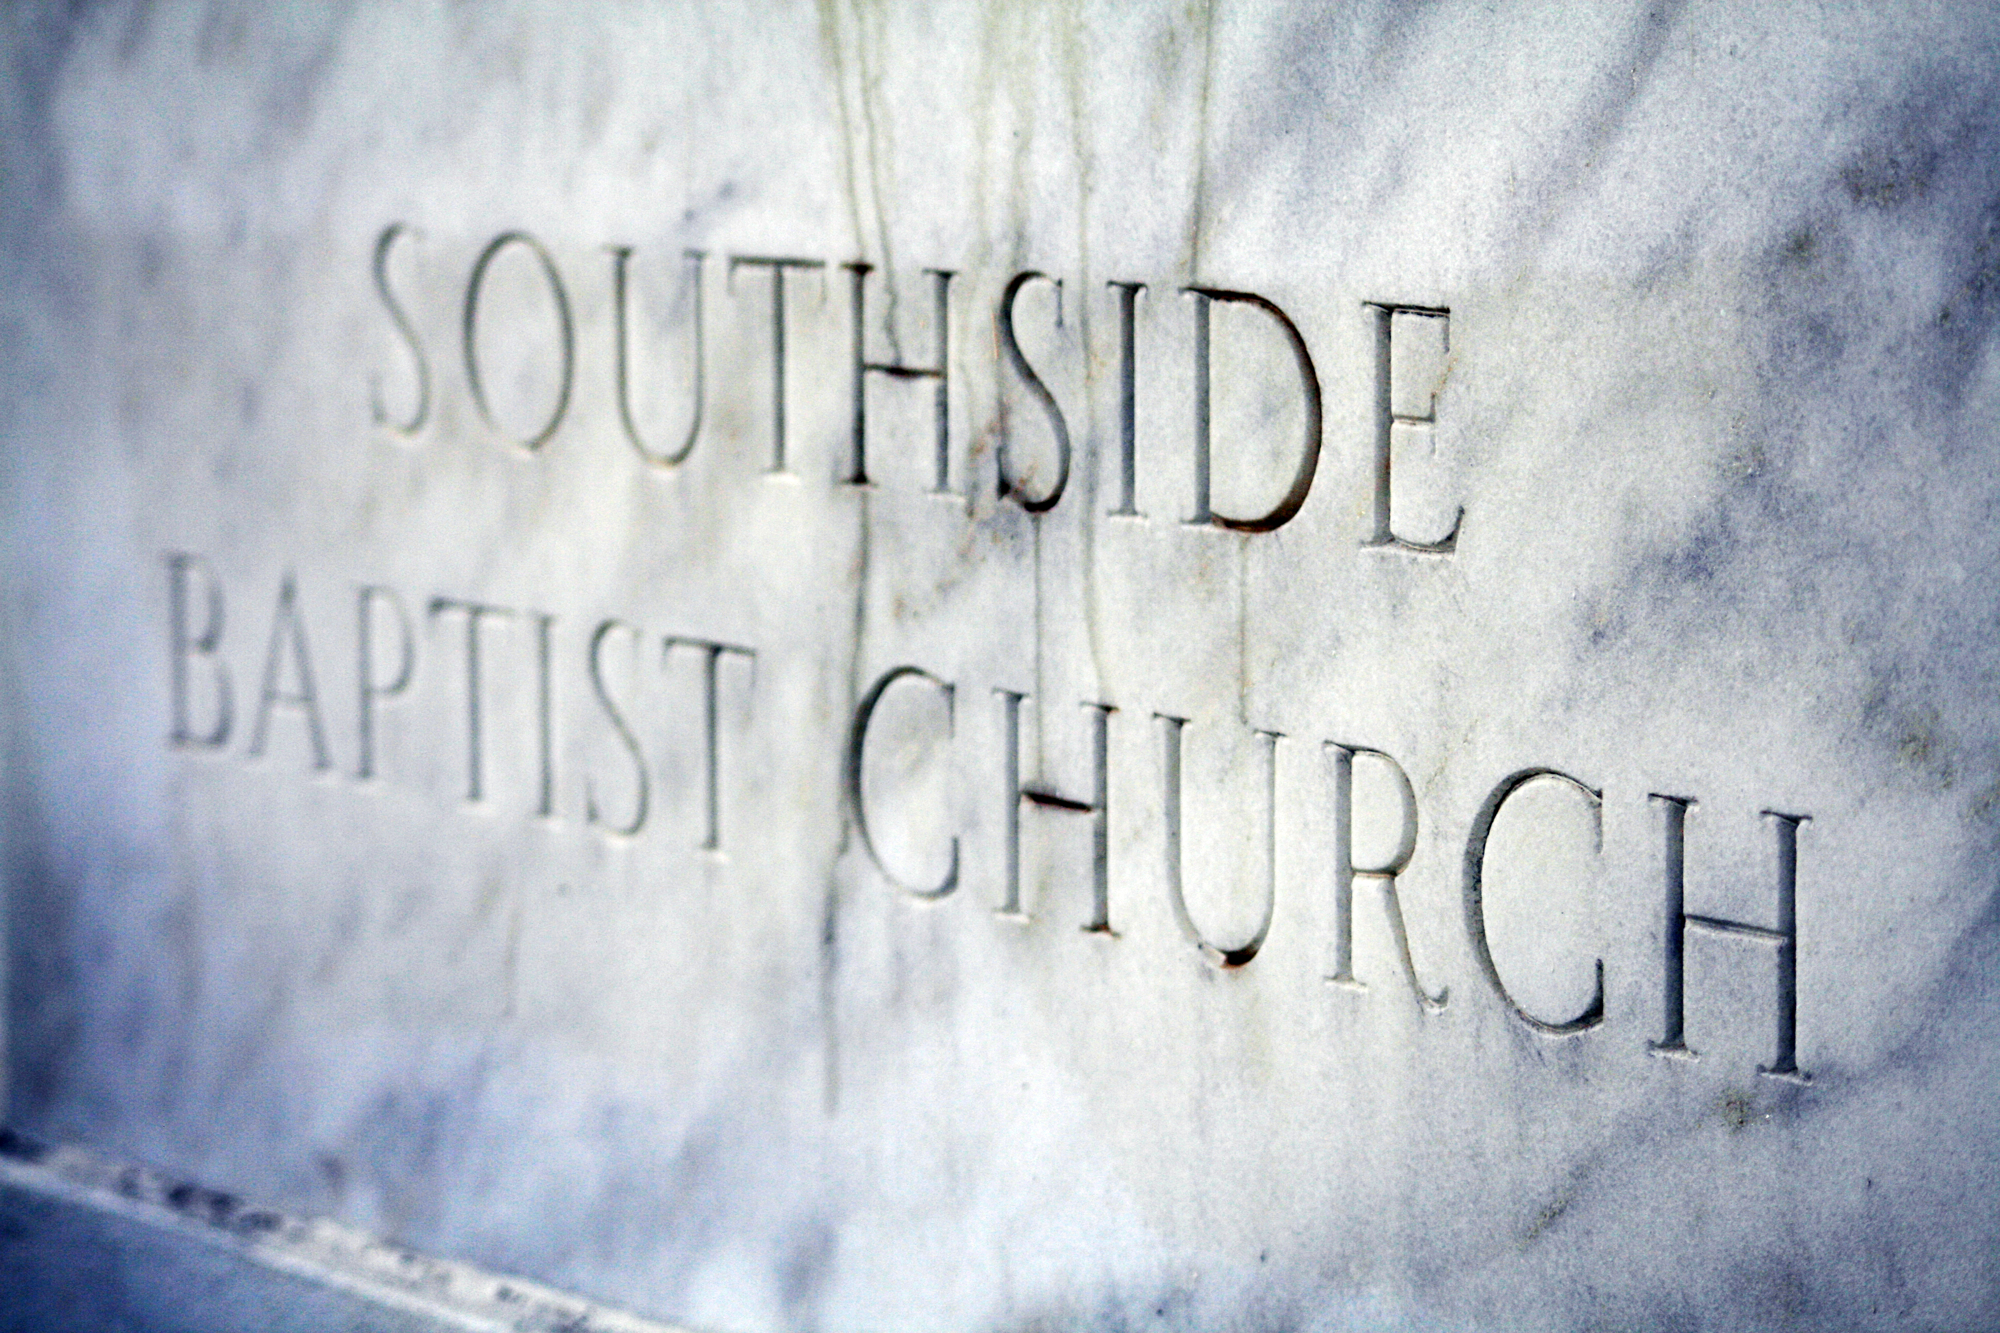 Southside Baptist Church was founded in 1939.